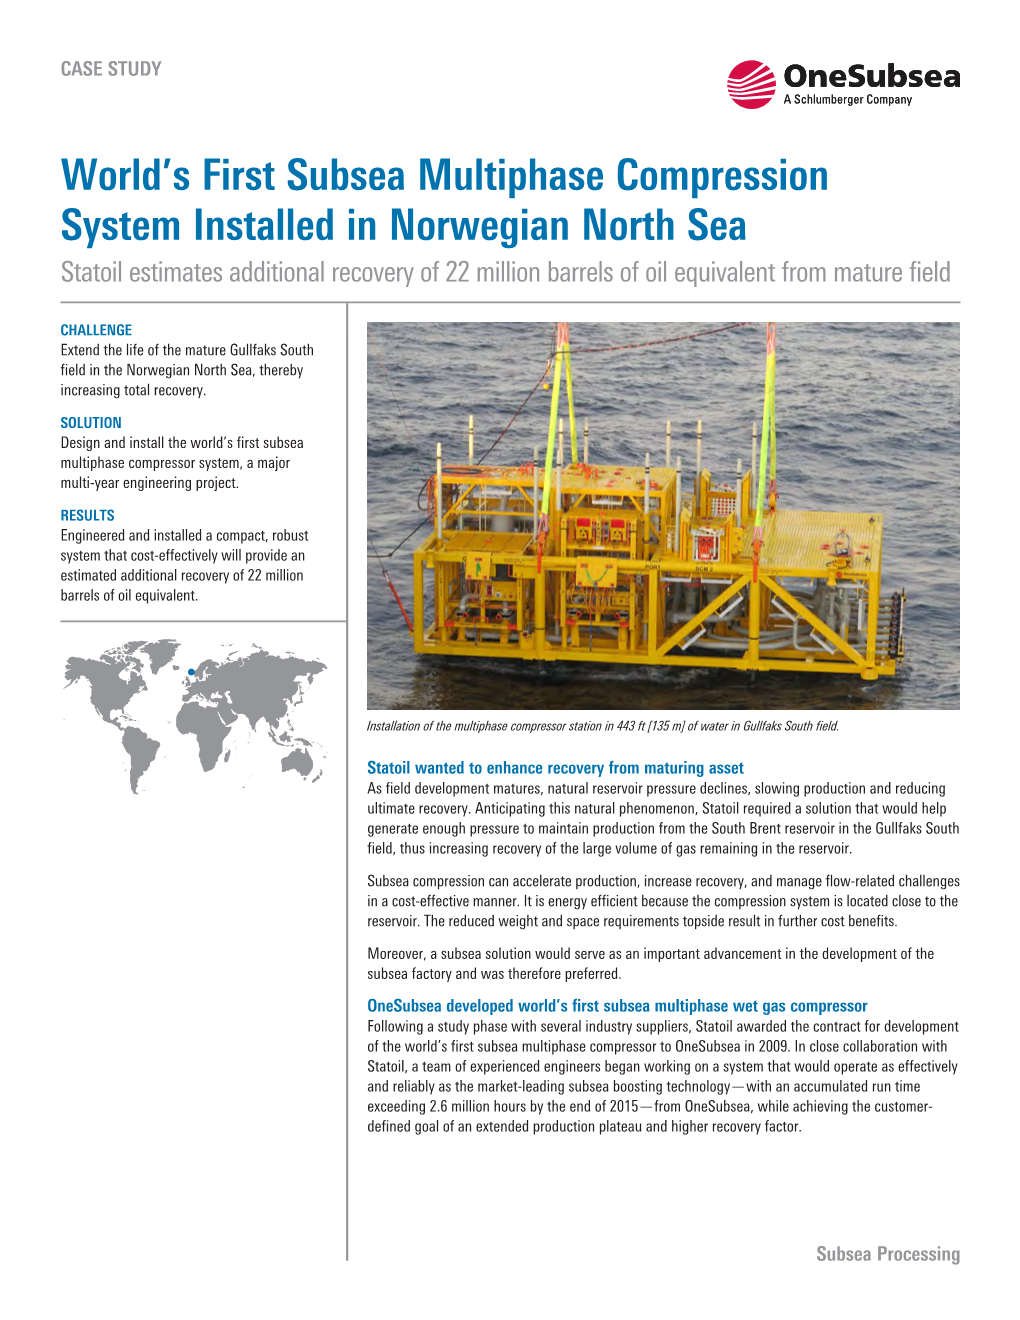 World's First Subsea Multiphase Compression System Installed In